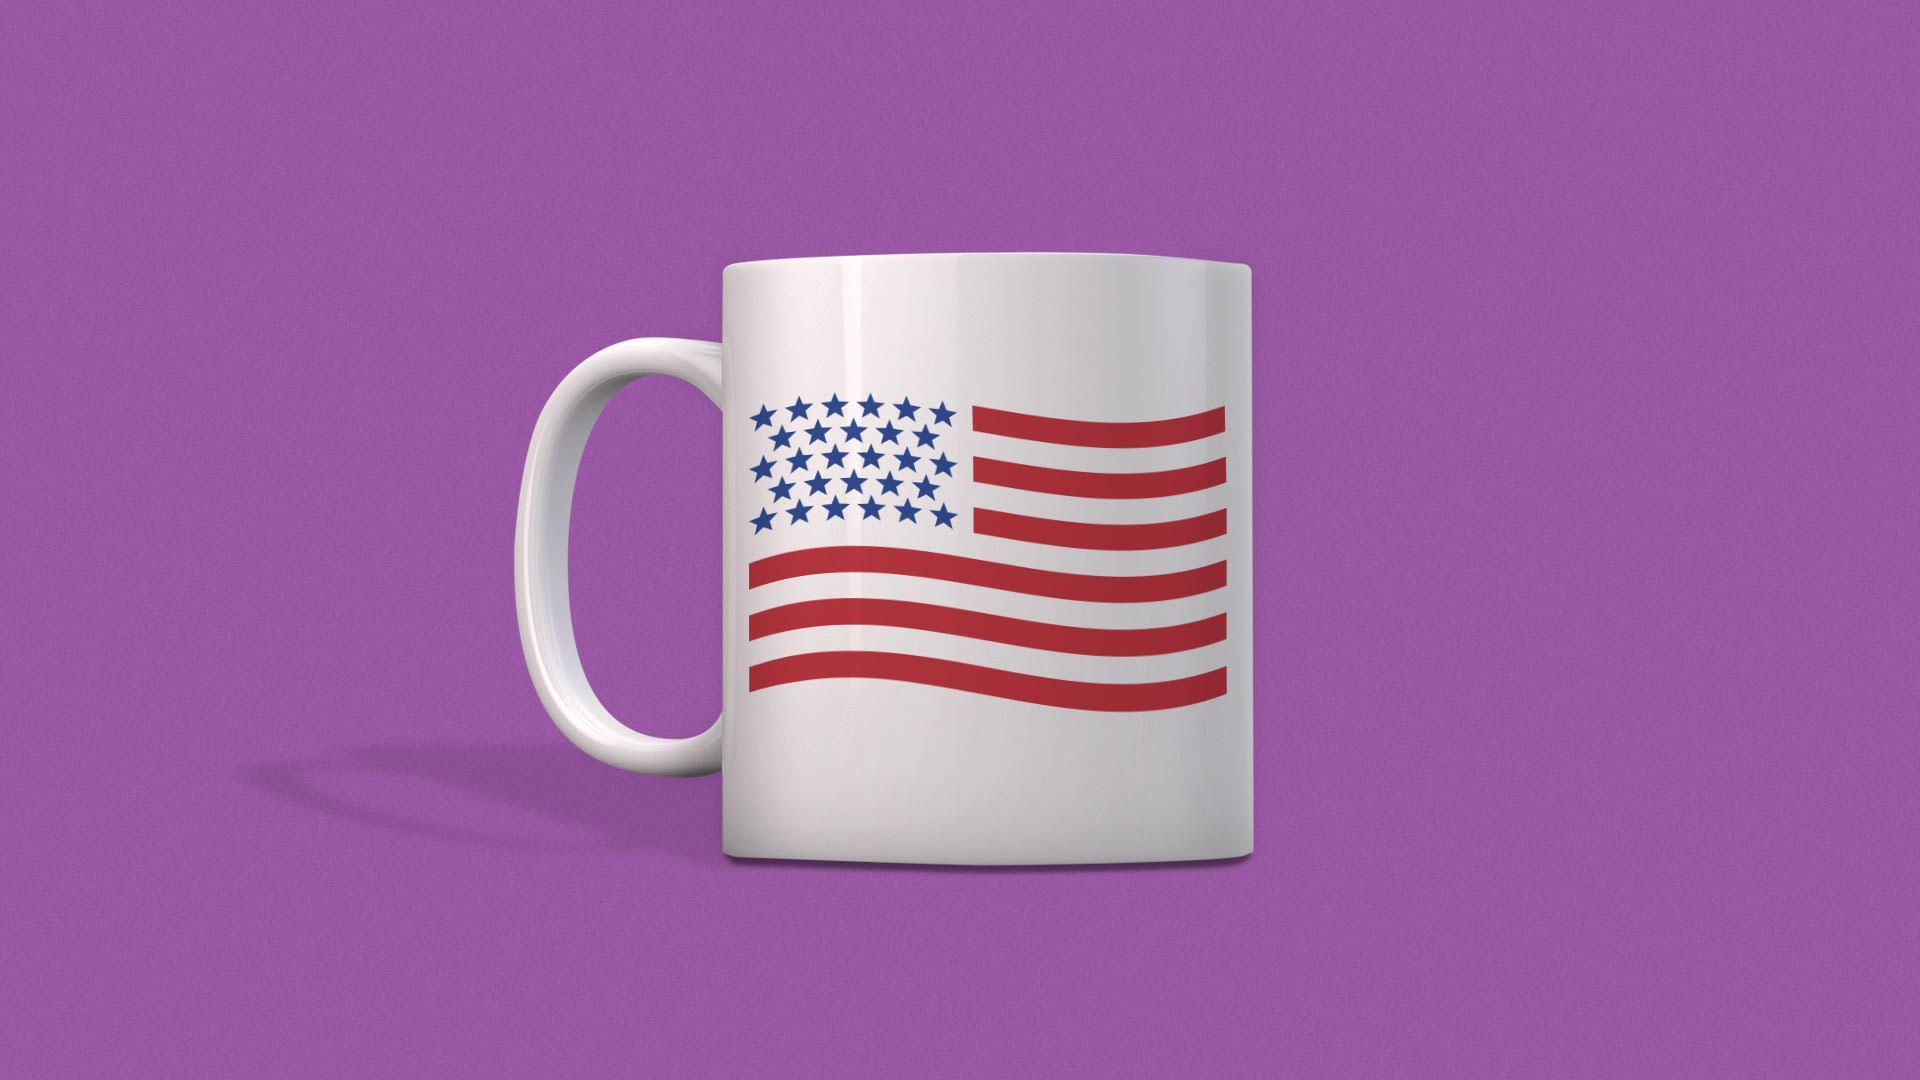 Illustration of coffee cup with American flag.